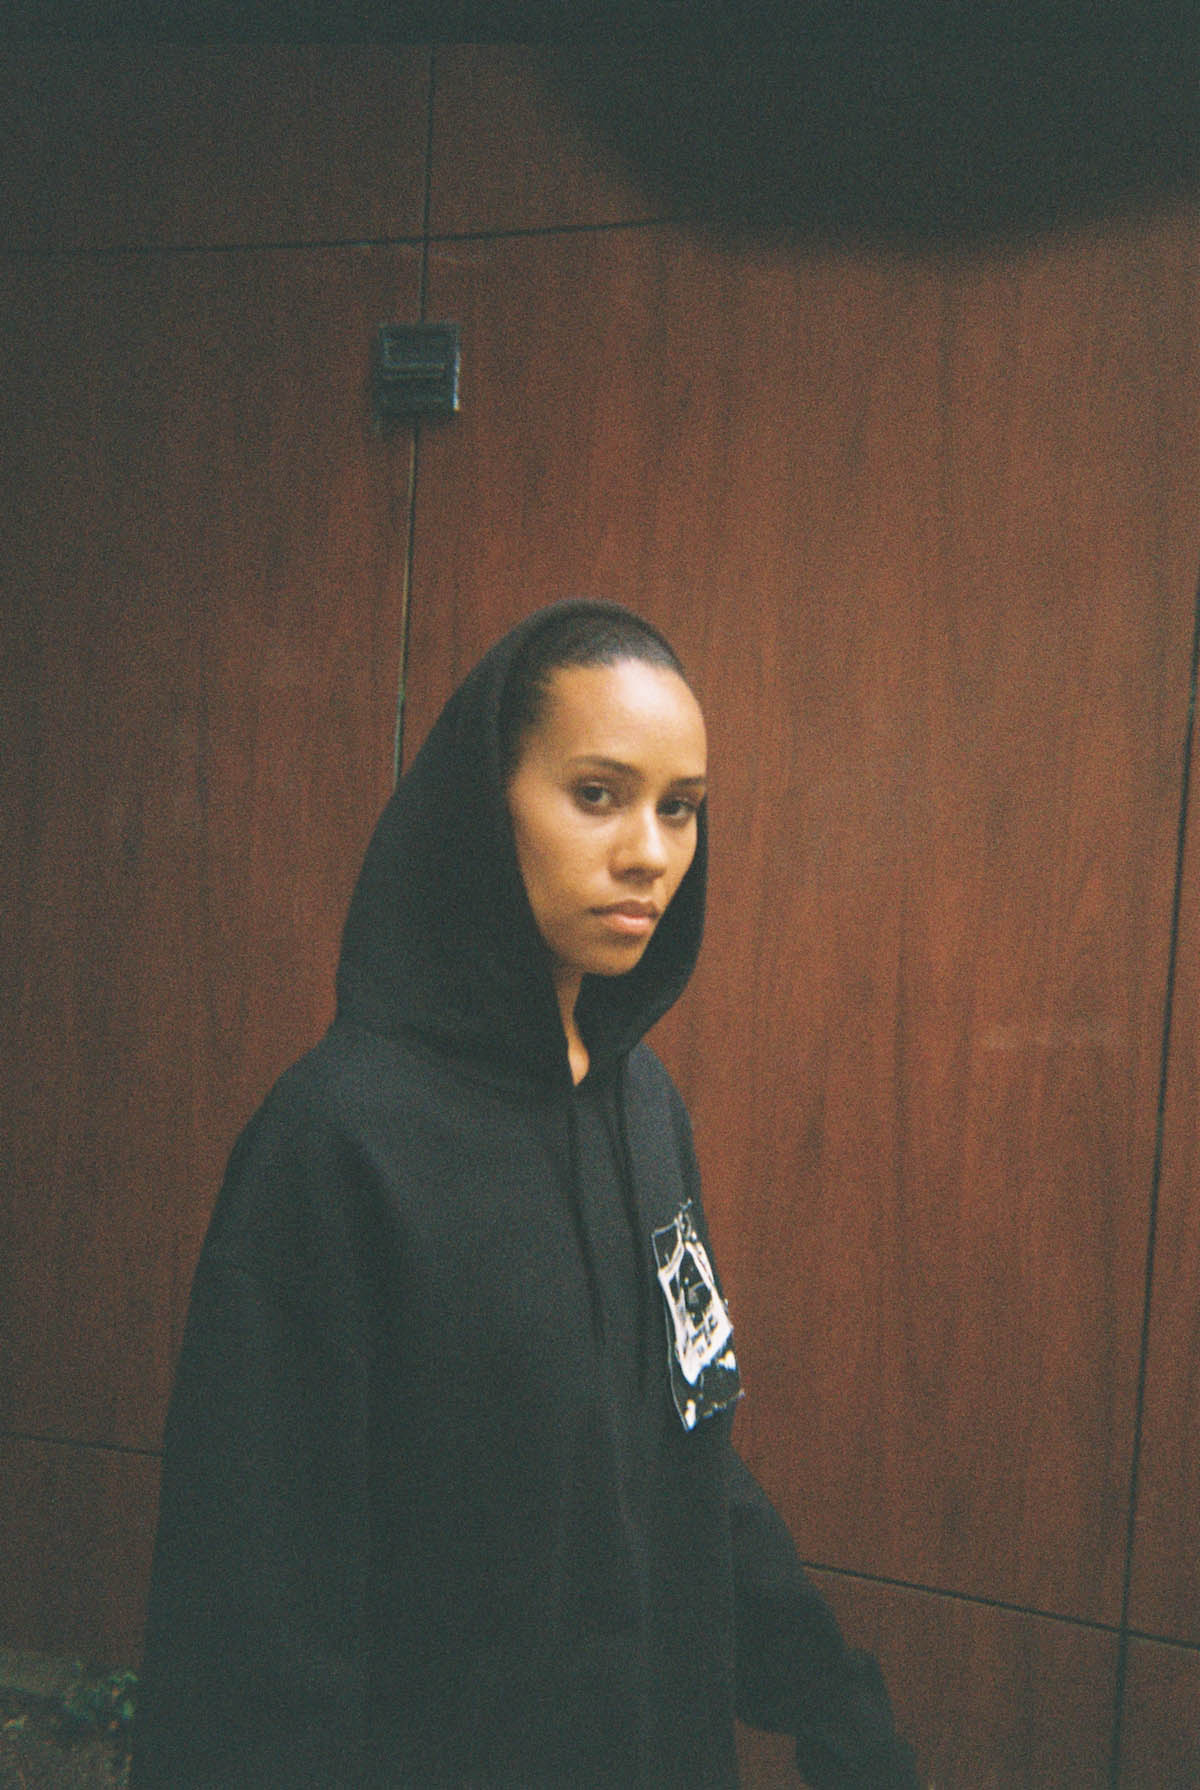 May The Muse can be seen up to her waist, she is standing at a slight angle to the camera and is wearing a black hoodie with a black and white large patch on the left chest. She wears the hood on her head and looks solemn. The part of her black hair that is still sticking out is combed back. The wall behind her is paneled with brown, large wooden panels. From above, a semicircular shadow protrudes into the picture.